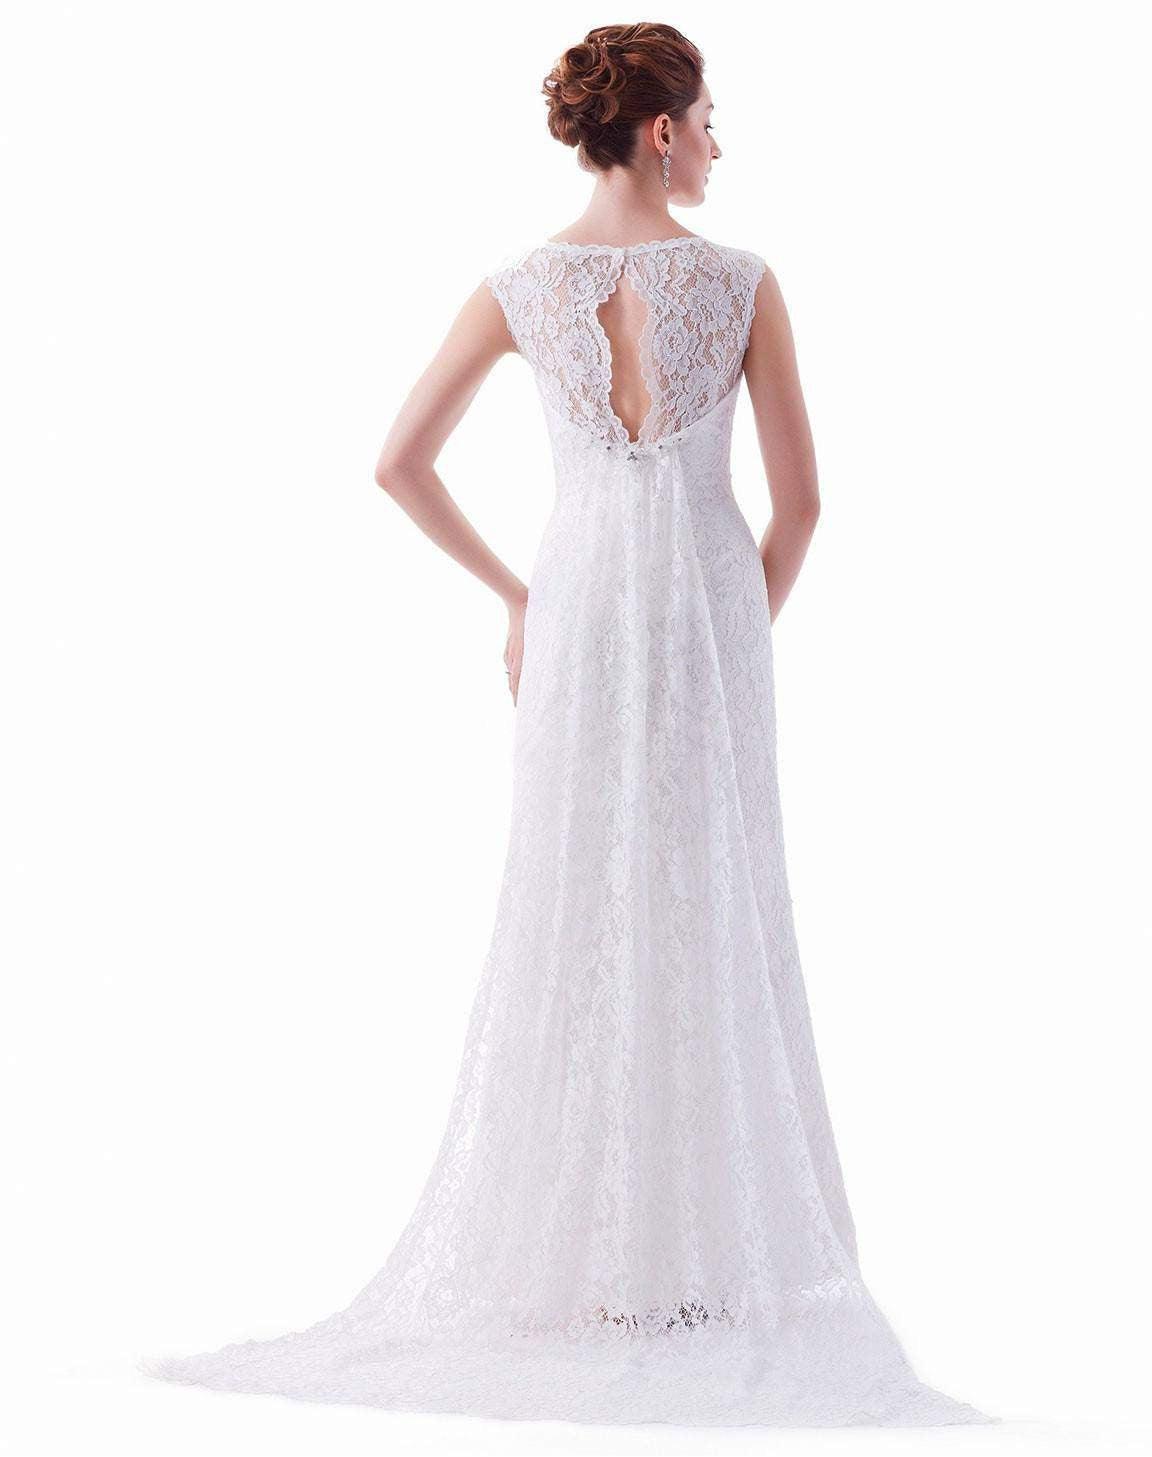 UK10 CAROLINE 40% OFF/ WAS £495/NOW - Adore Bridal and Occasion Wear